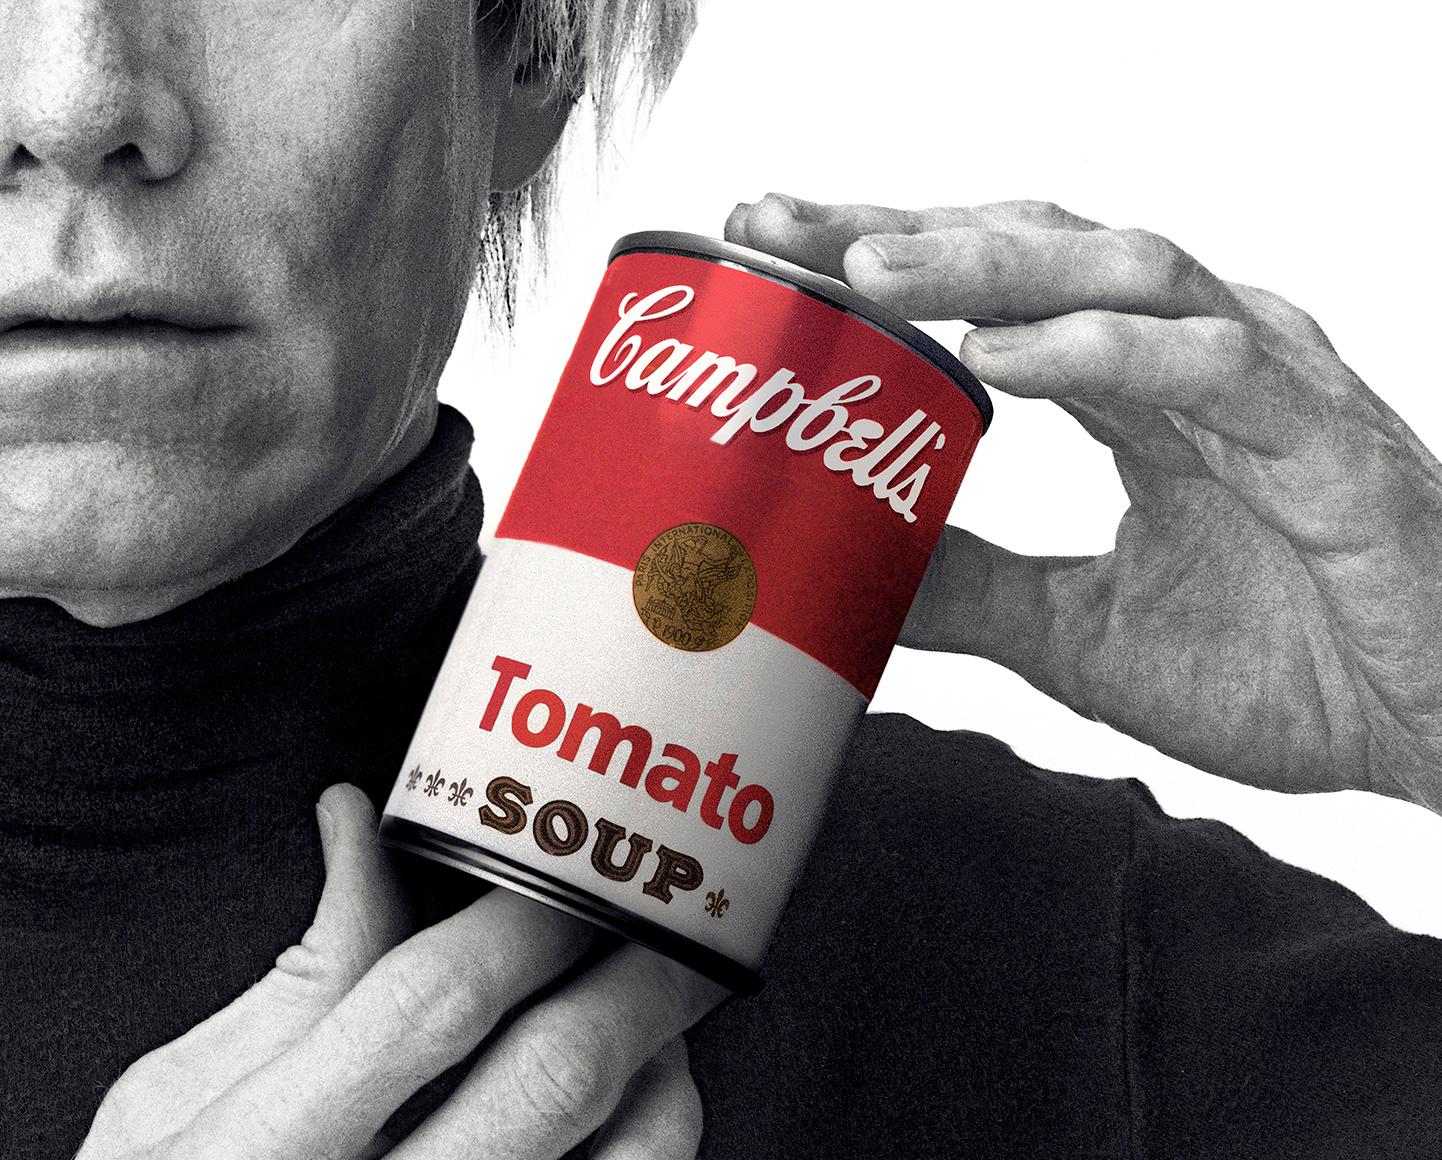 Andrew Unangst, Archival 'Andy Warhol with Red Campbell's Soup', 2020 For Sale 5